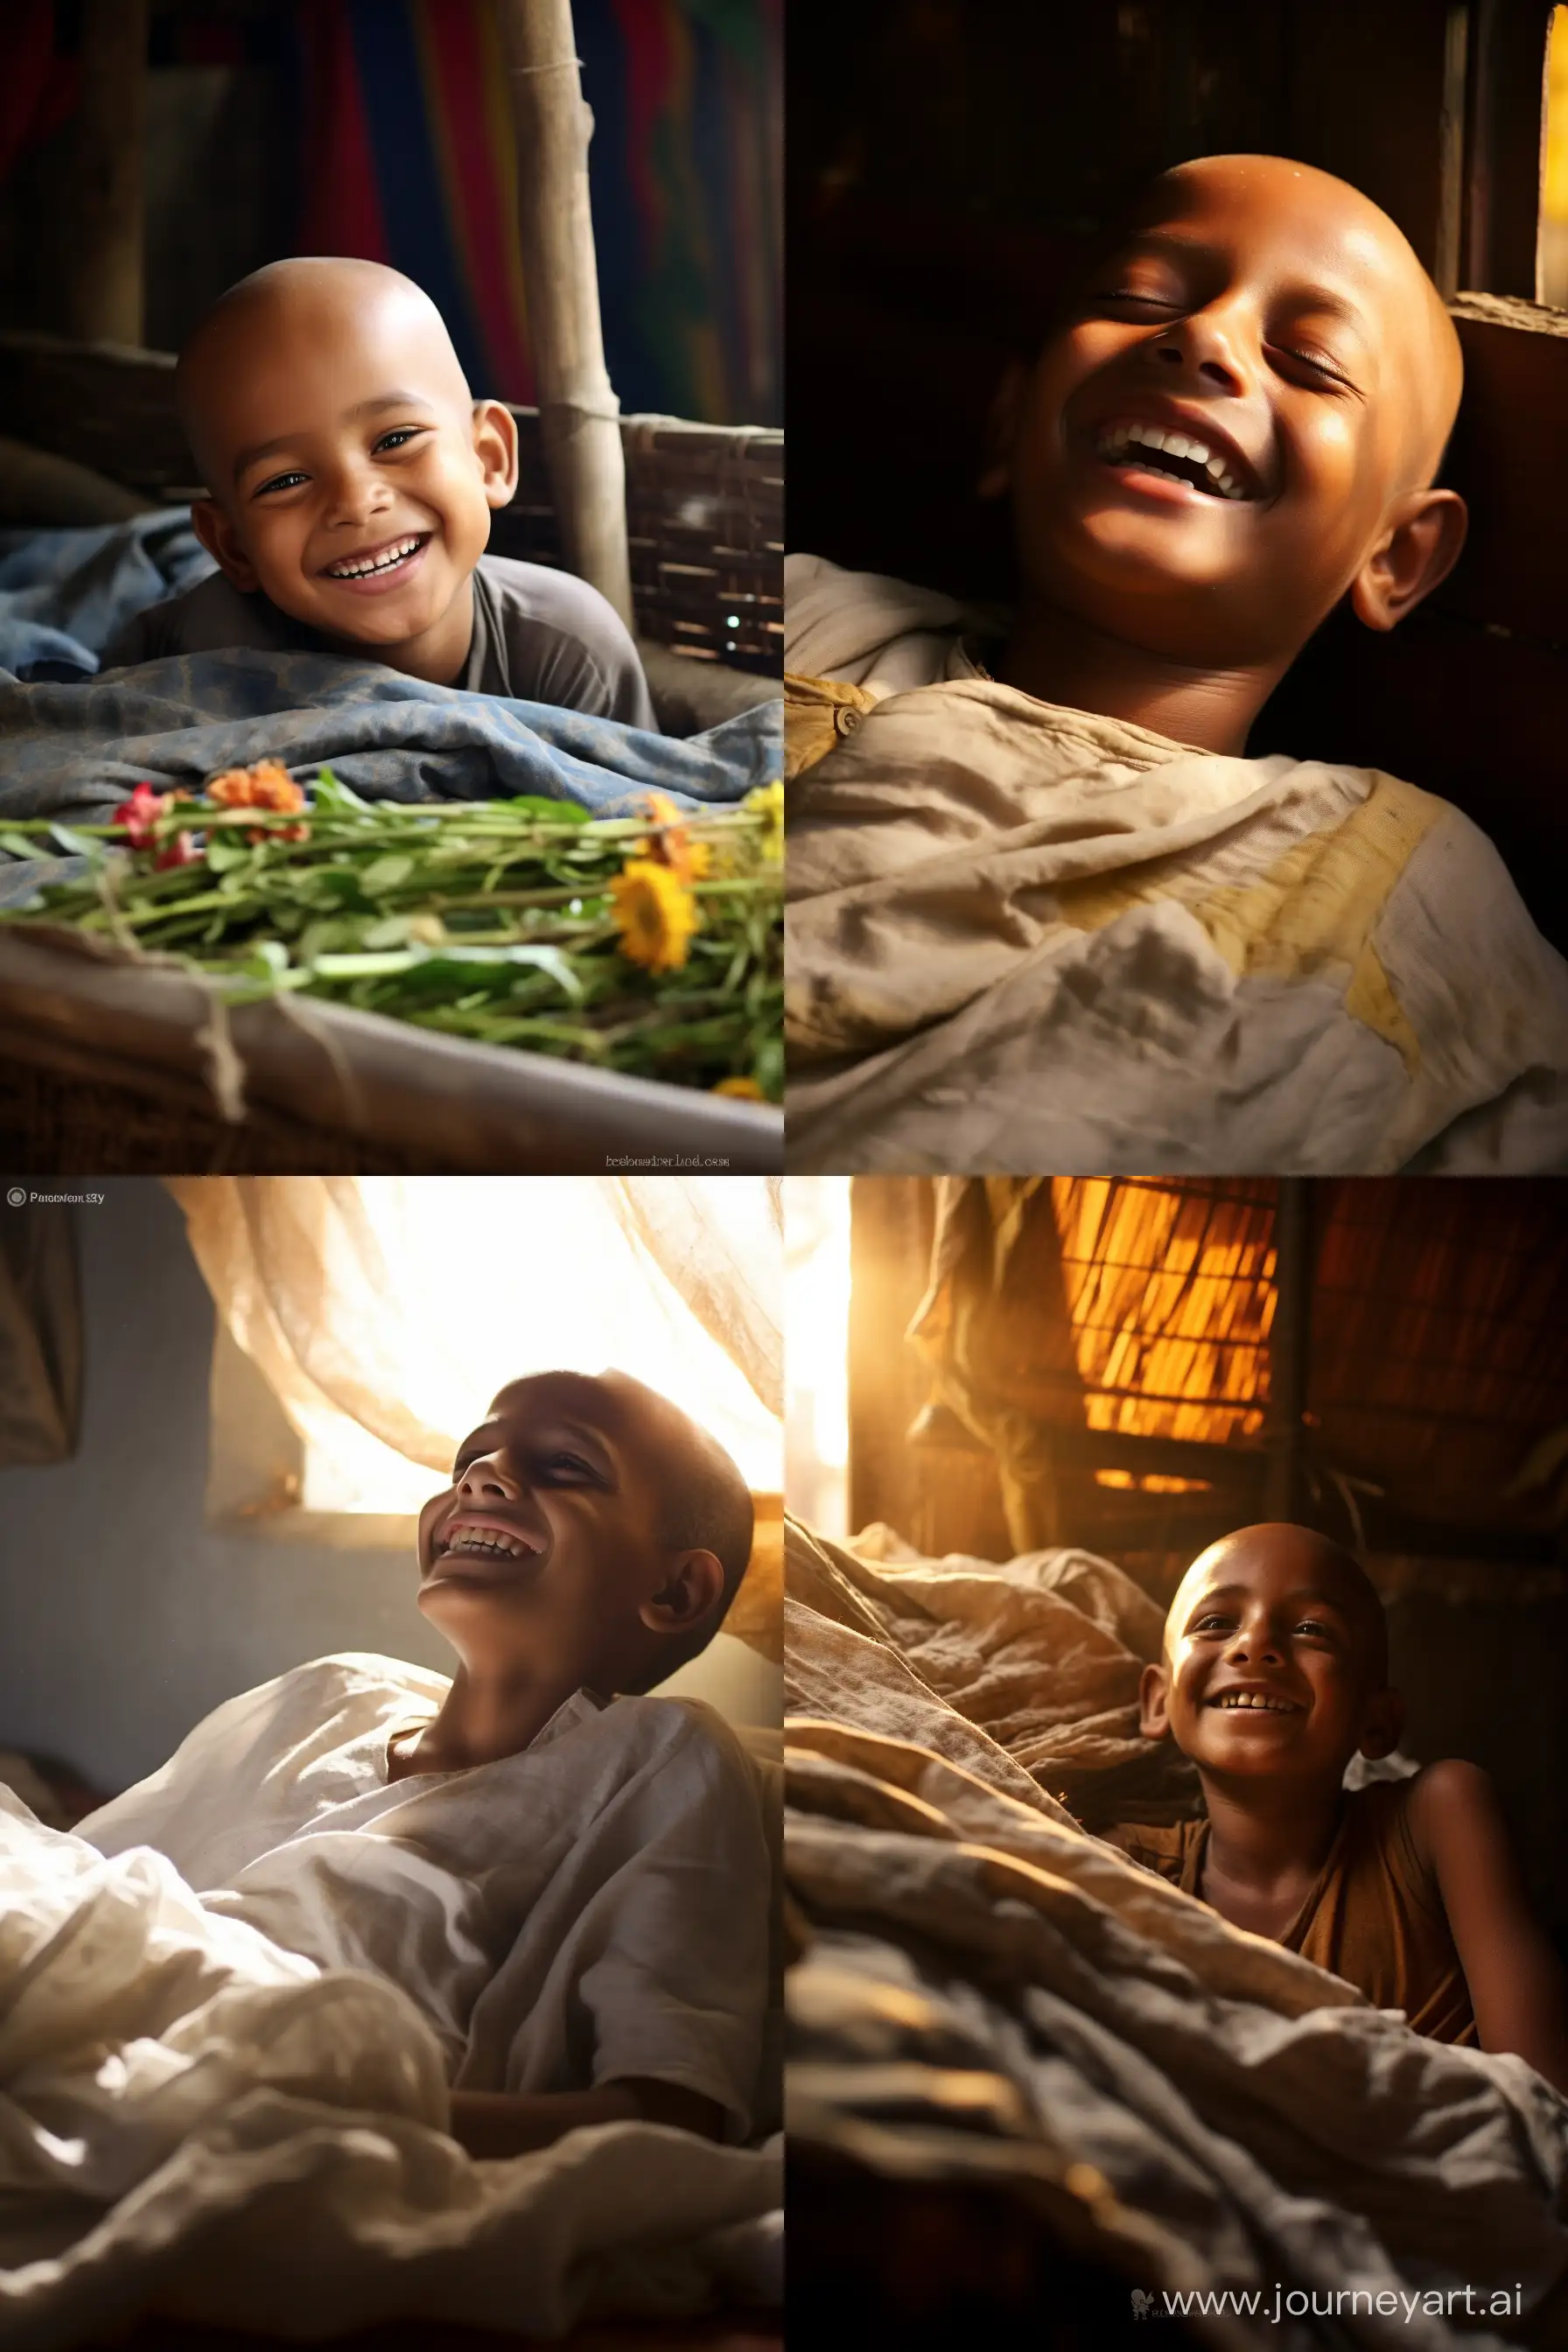 /imagine prompt: color photo of "A bald toothless Bangladeshi boy with a precious smile lying on the bed", , Incredible resilience shining through his eyes,  Warm, sun-kissed skin reflecting a life well-lived, Wisps of silver hair framing his gentle face, Eyes brimming with stories of strength and courage, , Soft, worn bed sheets cradling his fragile frame, Sunlight streaming through a cracked windowpane, , A mix of emotions dancing in the room, A bittersweet blend of joy and sadness, A sense of hope, despite life's hardships, , Captured with a vintage Leica M6 camera, Loaded with Kodak Portra 400 film, A classic 50mm lens to capture every nuance, , Wes Anderson, the master of whimsical storytelling, Roger Deakins, the maestro of cinematography, Annie Leibovitz, the visionary photographer, Alexander McQueen, the avant-garde fashion designer, , —c 10 —ar 2:3